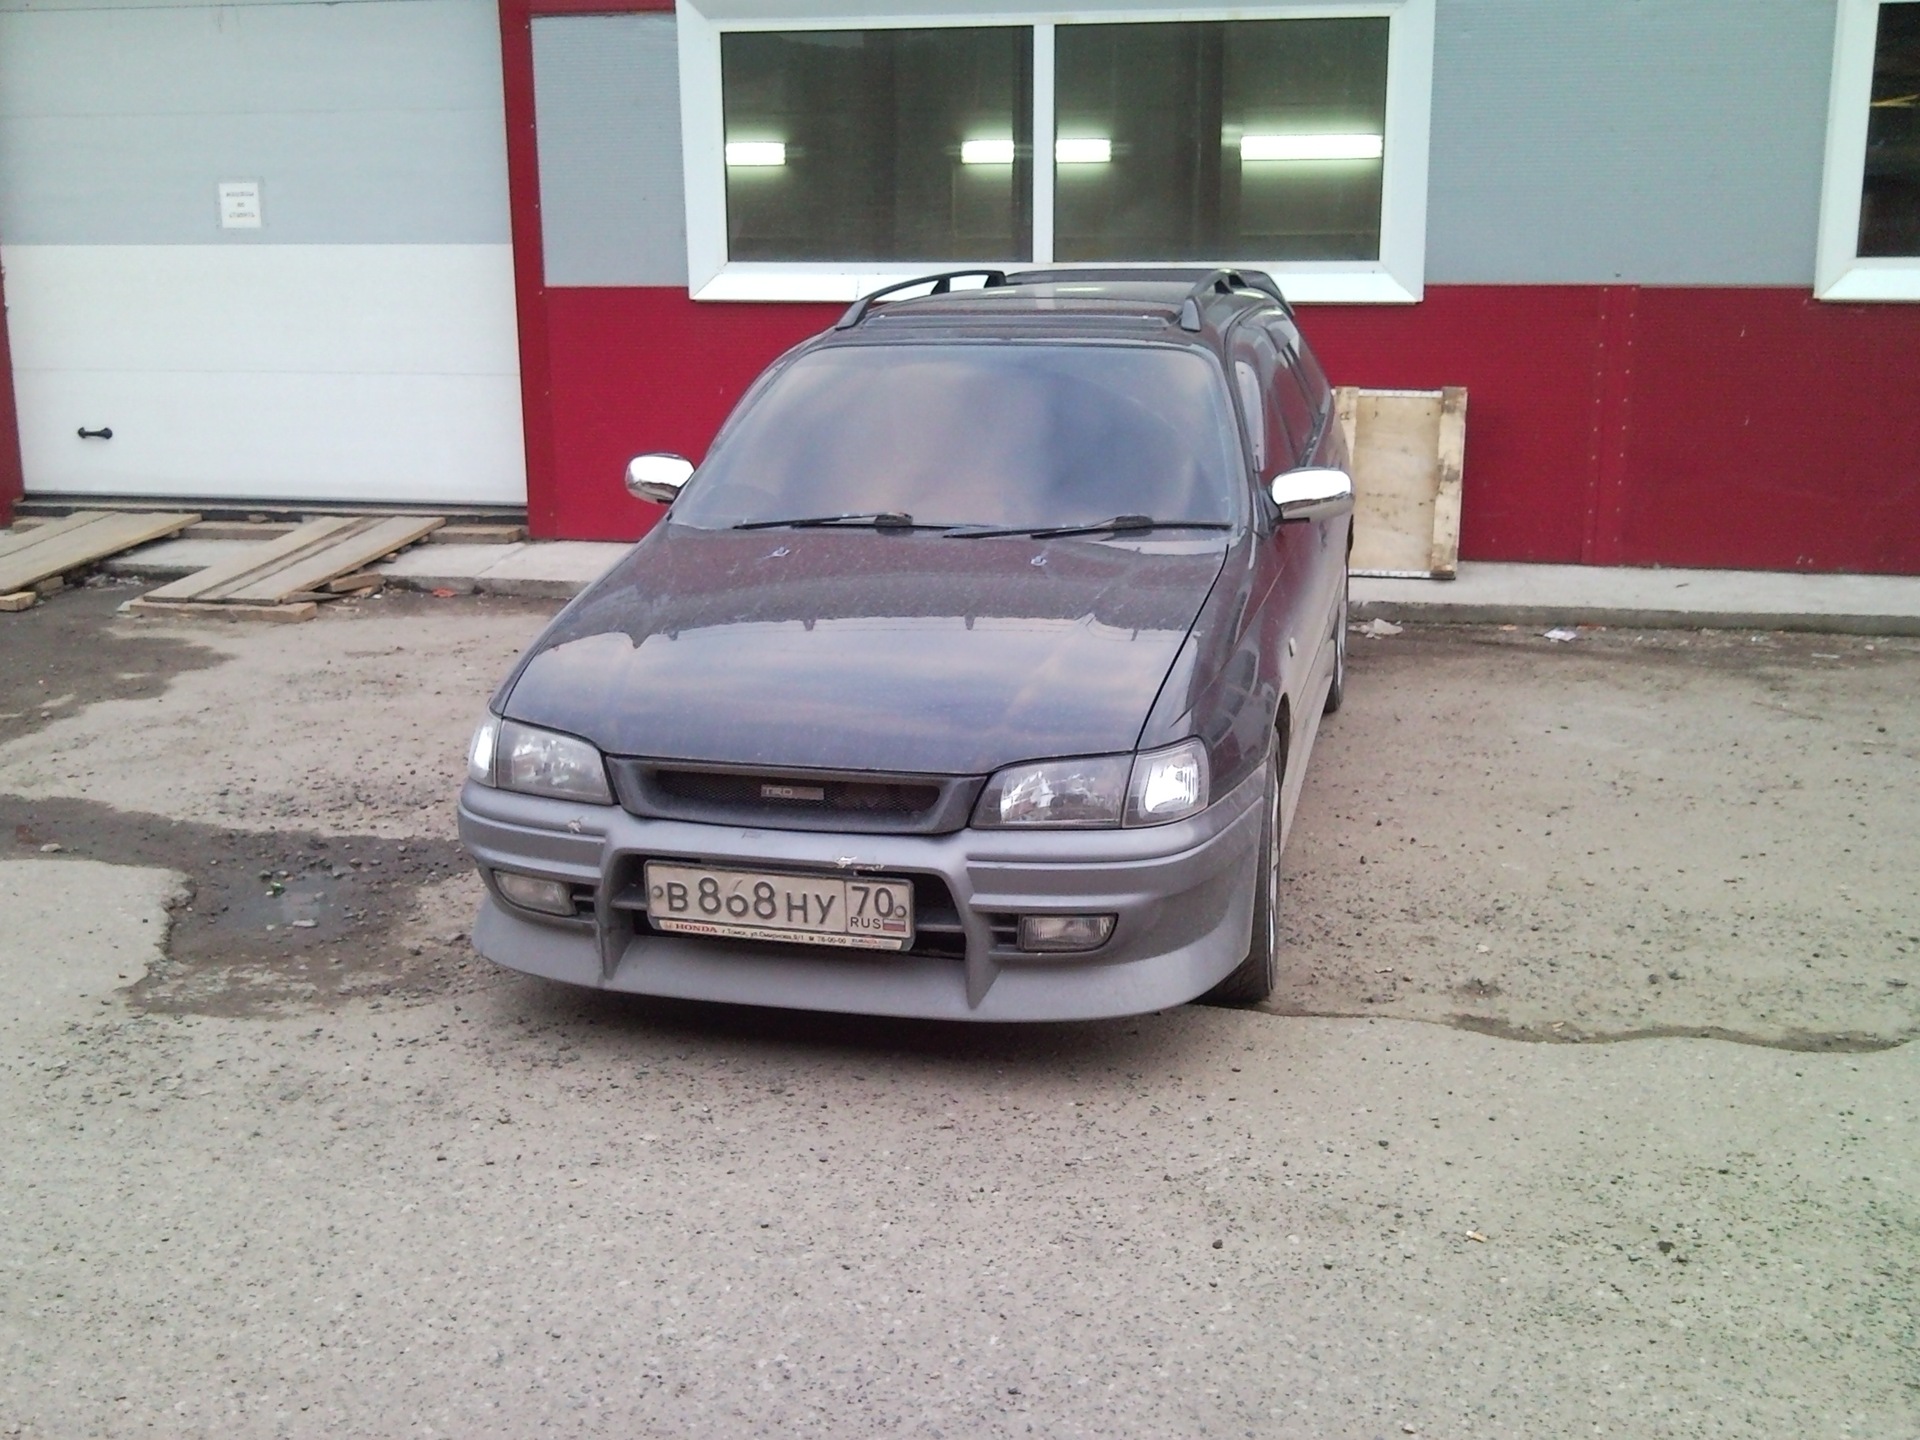 Chrome lining on mirrors in Tomsk like no one else has - Toyota Caldina 20 l 1995